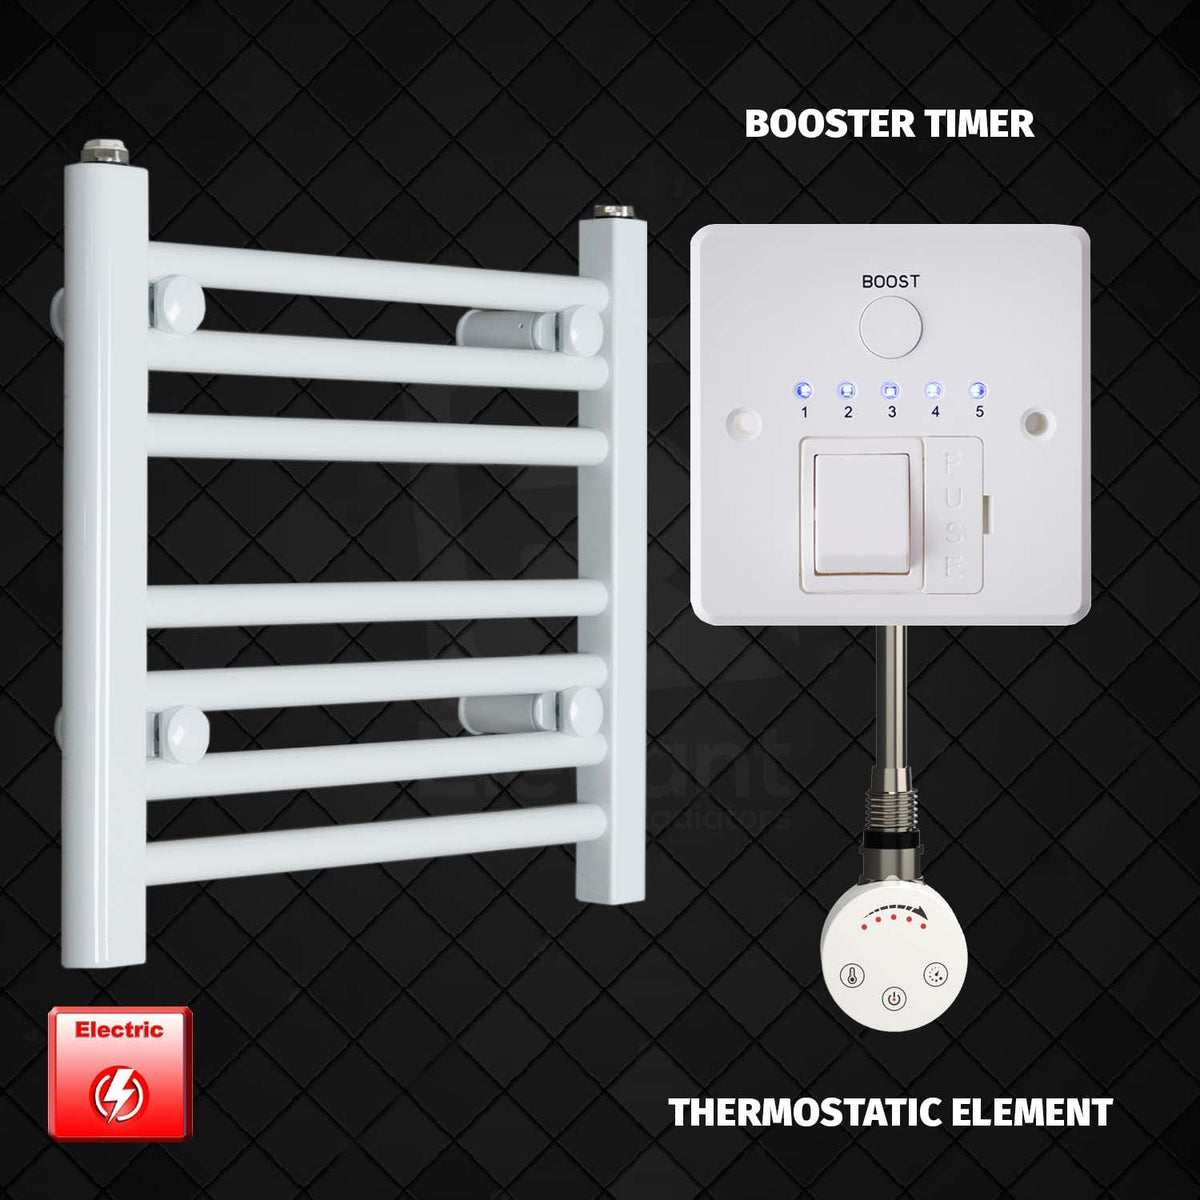 400 mm High 500 mm Wide Pre-Filled Electric Heated Towel Rail Radiator White HTR SMR Booster Timer Thermostatic Element